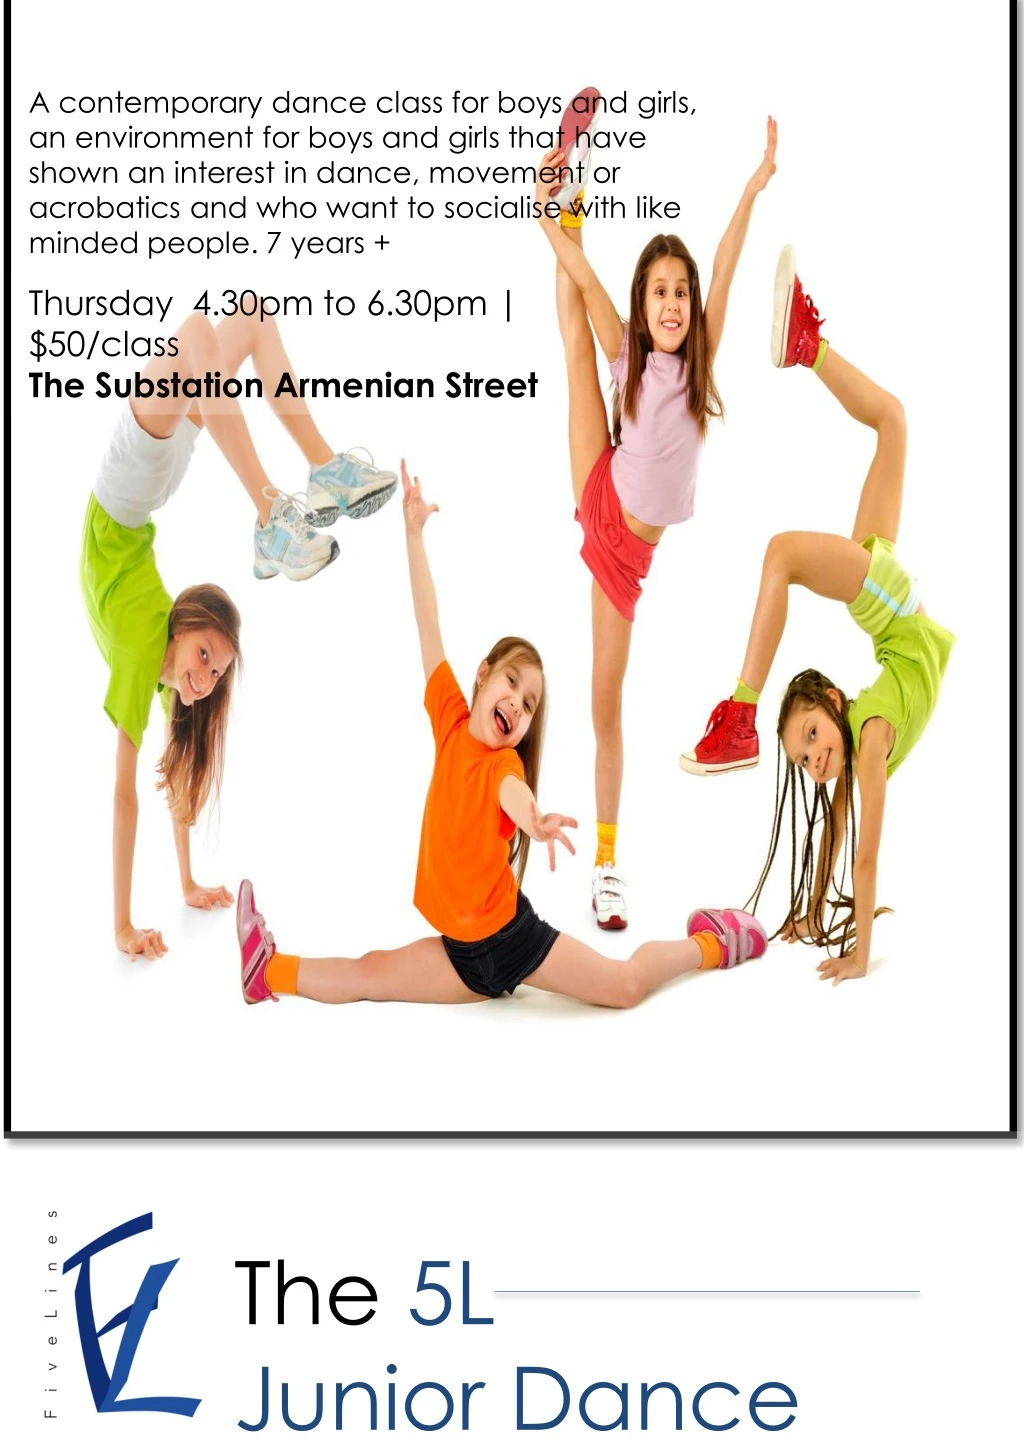 a contemporary dance class for boys and girls